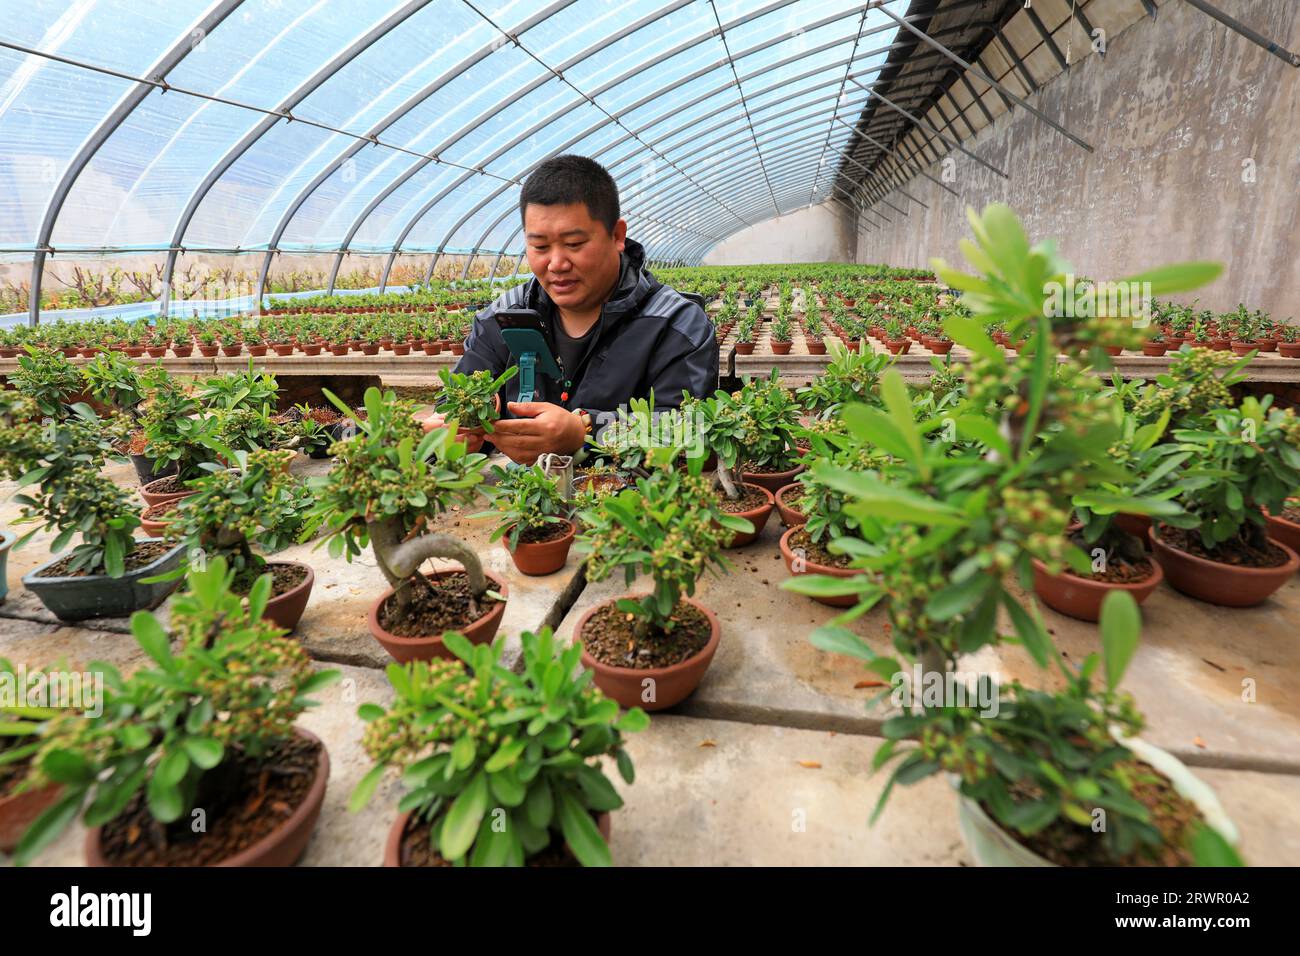 LUANNAN COUNTY, China - May 10, 2022: a gardener uses his mobile phone to display a bonsai of Pyracantha in a nursery in North China Stock Photo